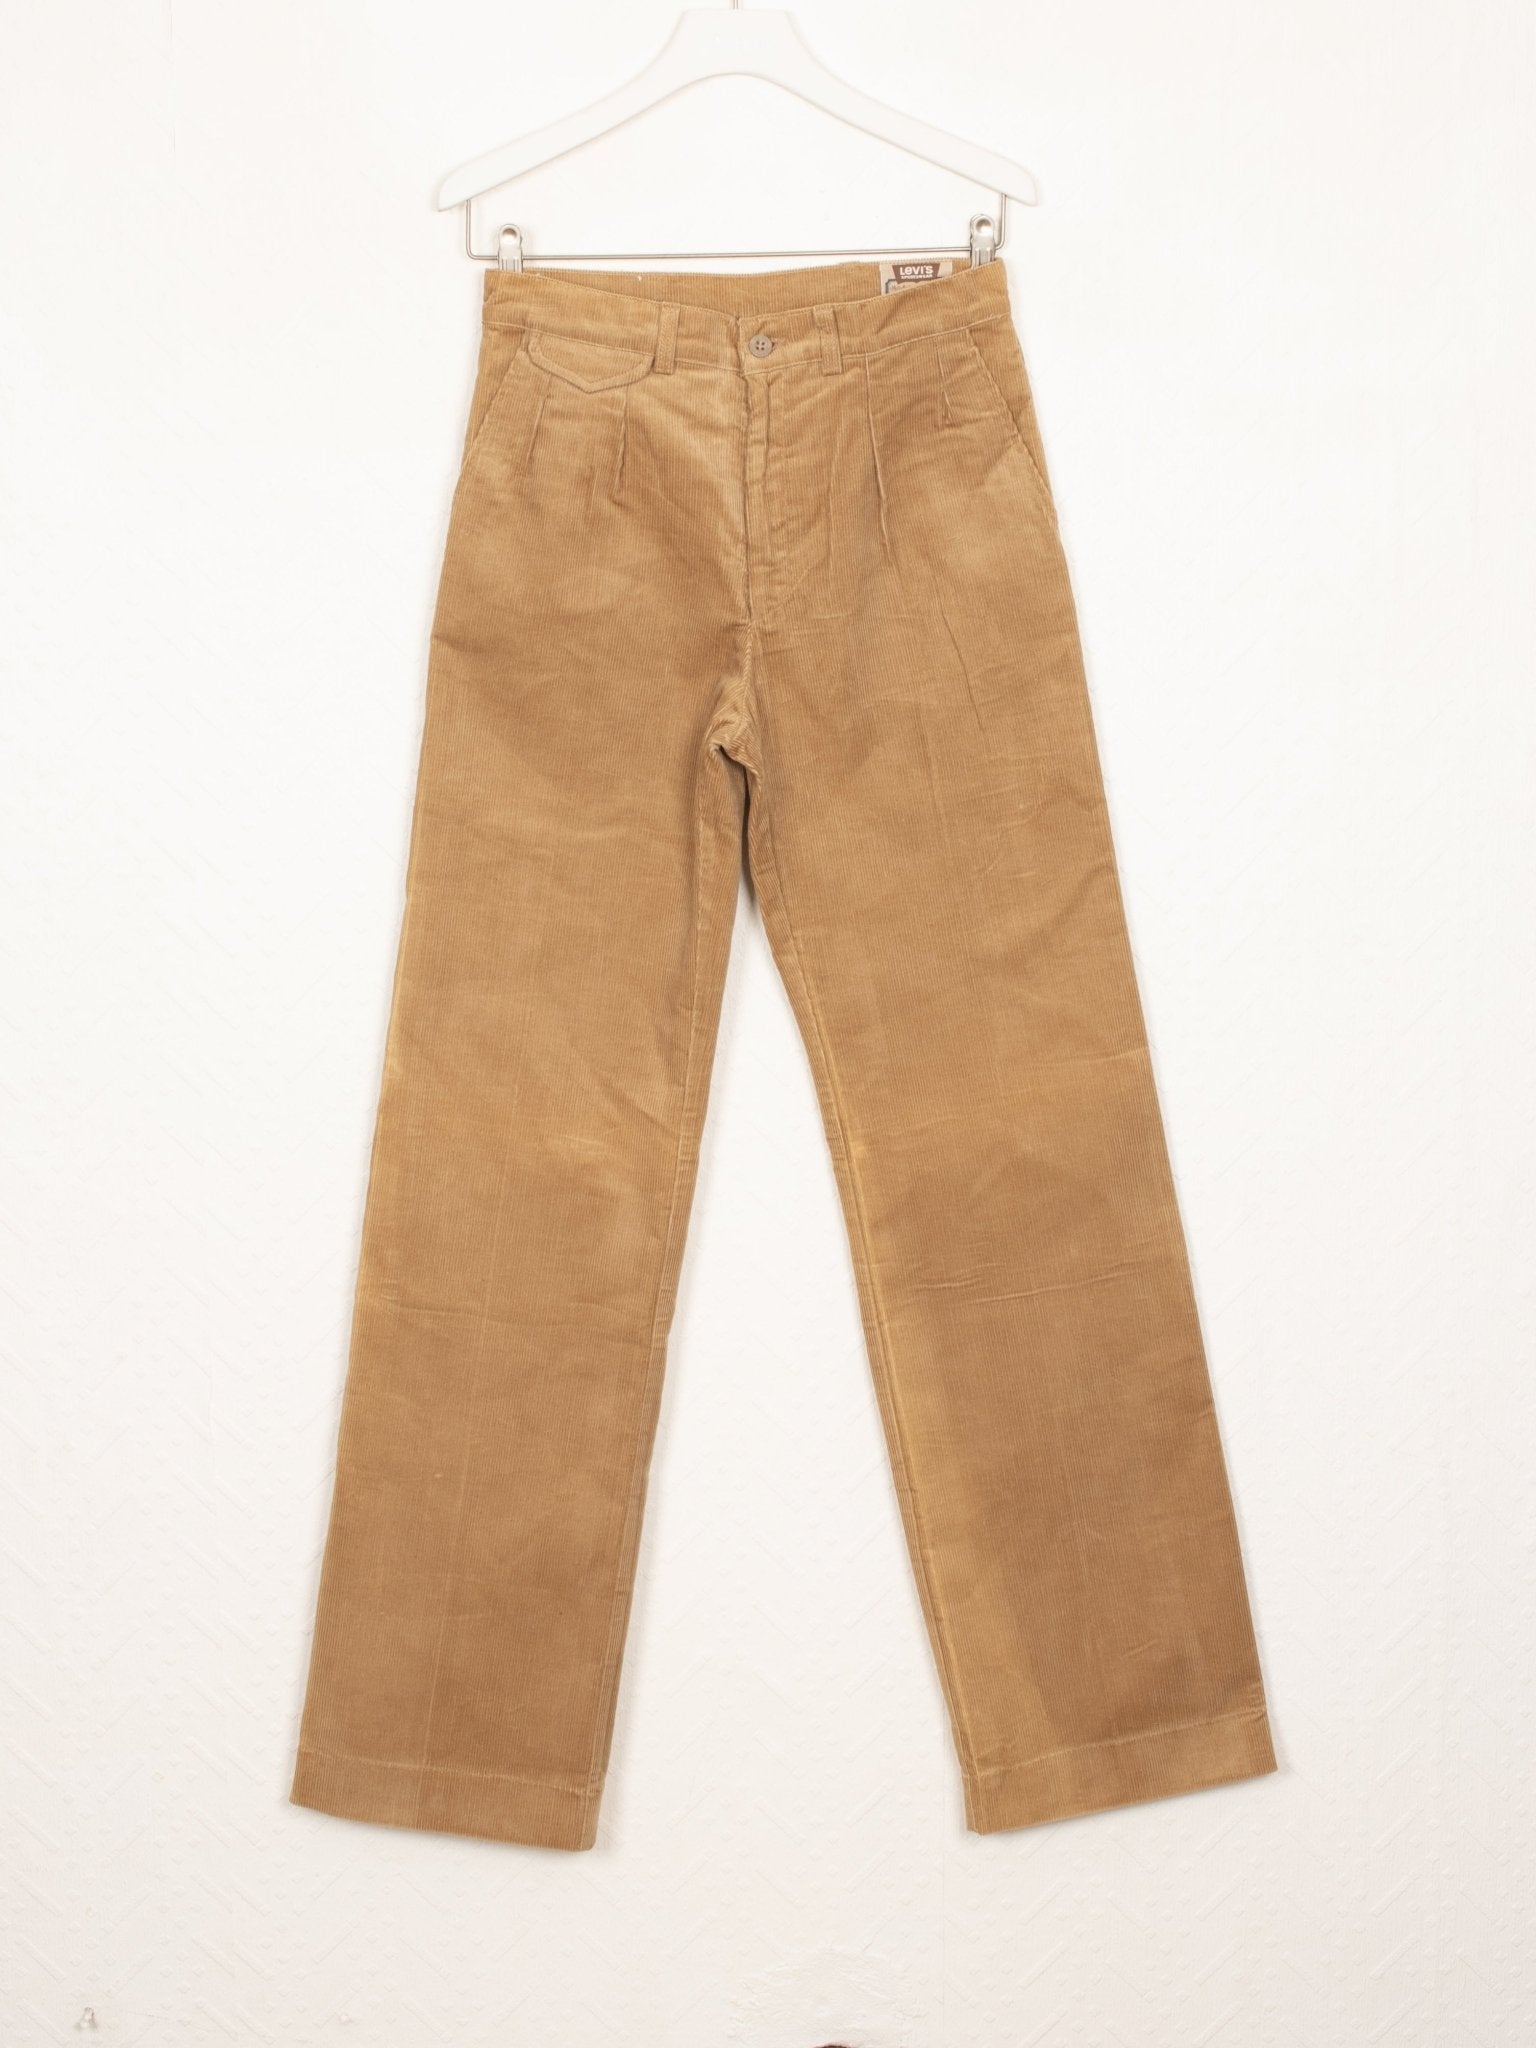 1970s Levi's 203 Chino Trousers